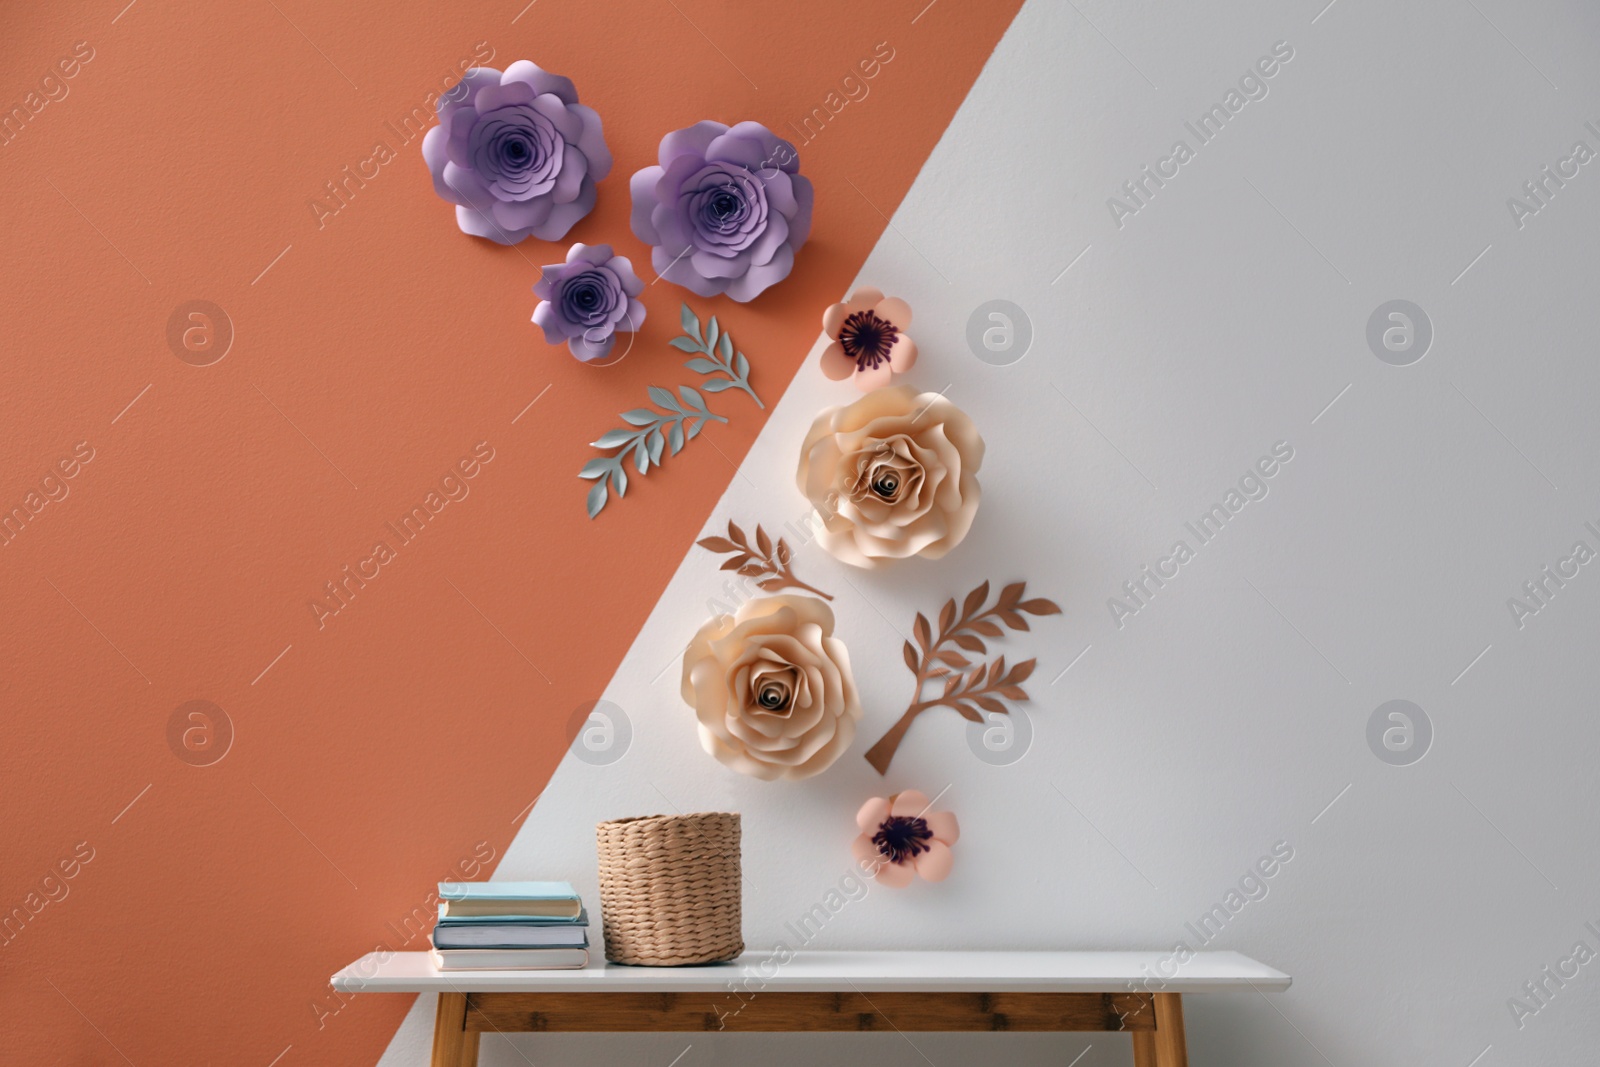 Photo of Books and holder on table near color wall with floral decor